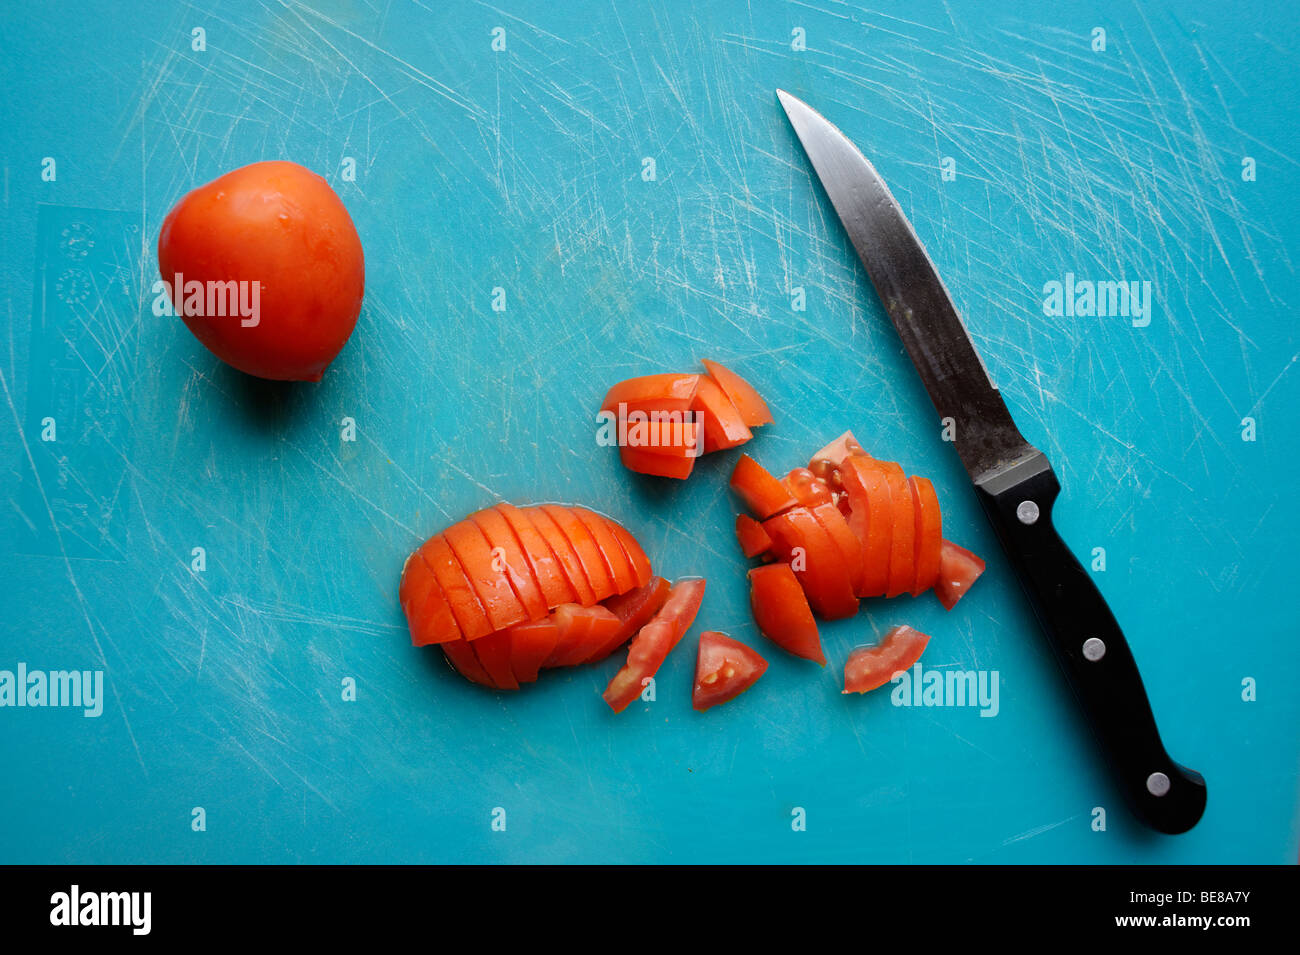 Freshly diced tomatoes on blue plastic chopping board with knife and cut marks. Stock Photo